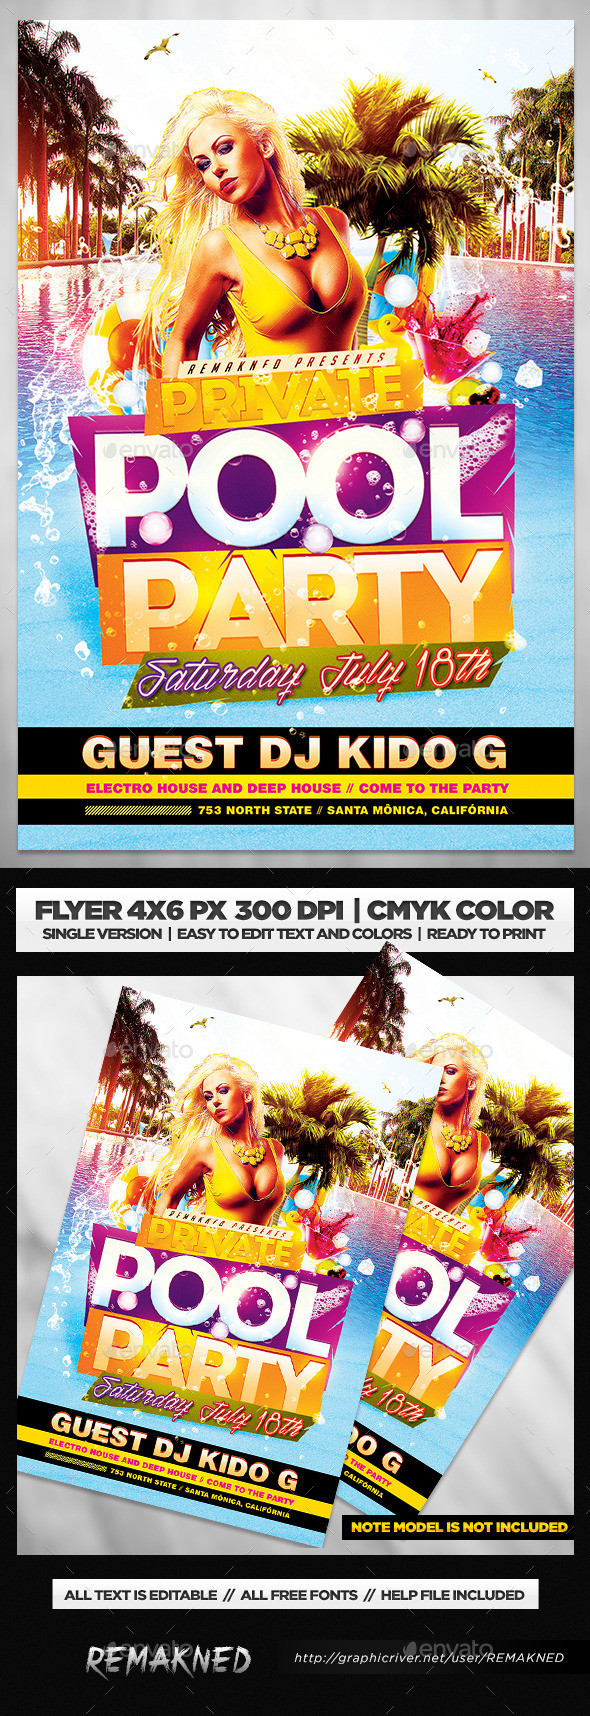 Private 20pool 20party 20flyer 20template 20psd